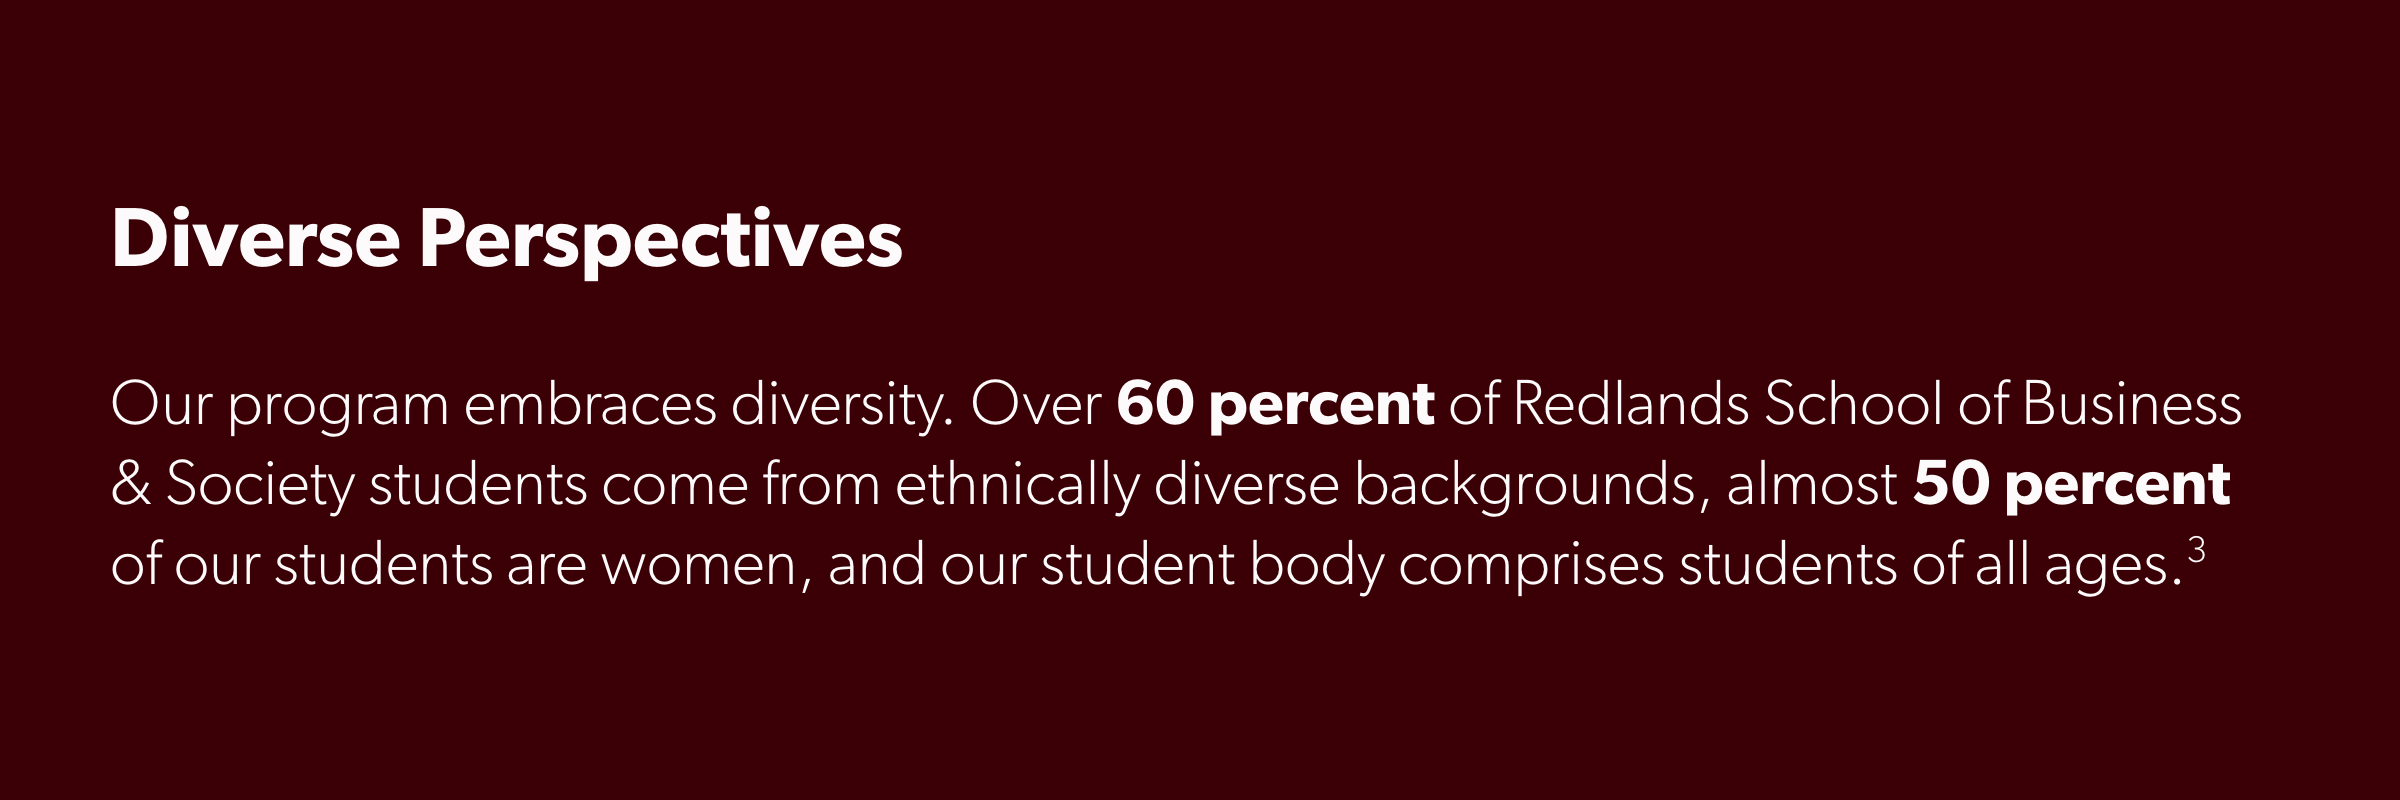 Our program embraces diversity. Over 60 percent of Redlands School of Business students come from ethnically diverse backgrounds, almost 50 percent of our students are women, and our student body comprises students of all ages.